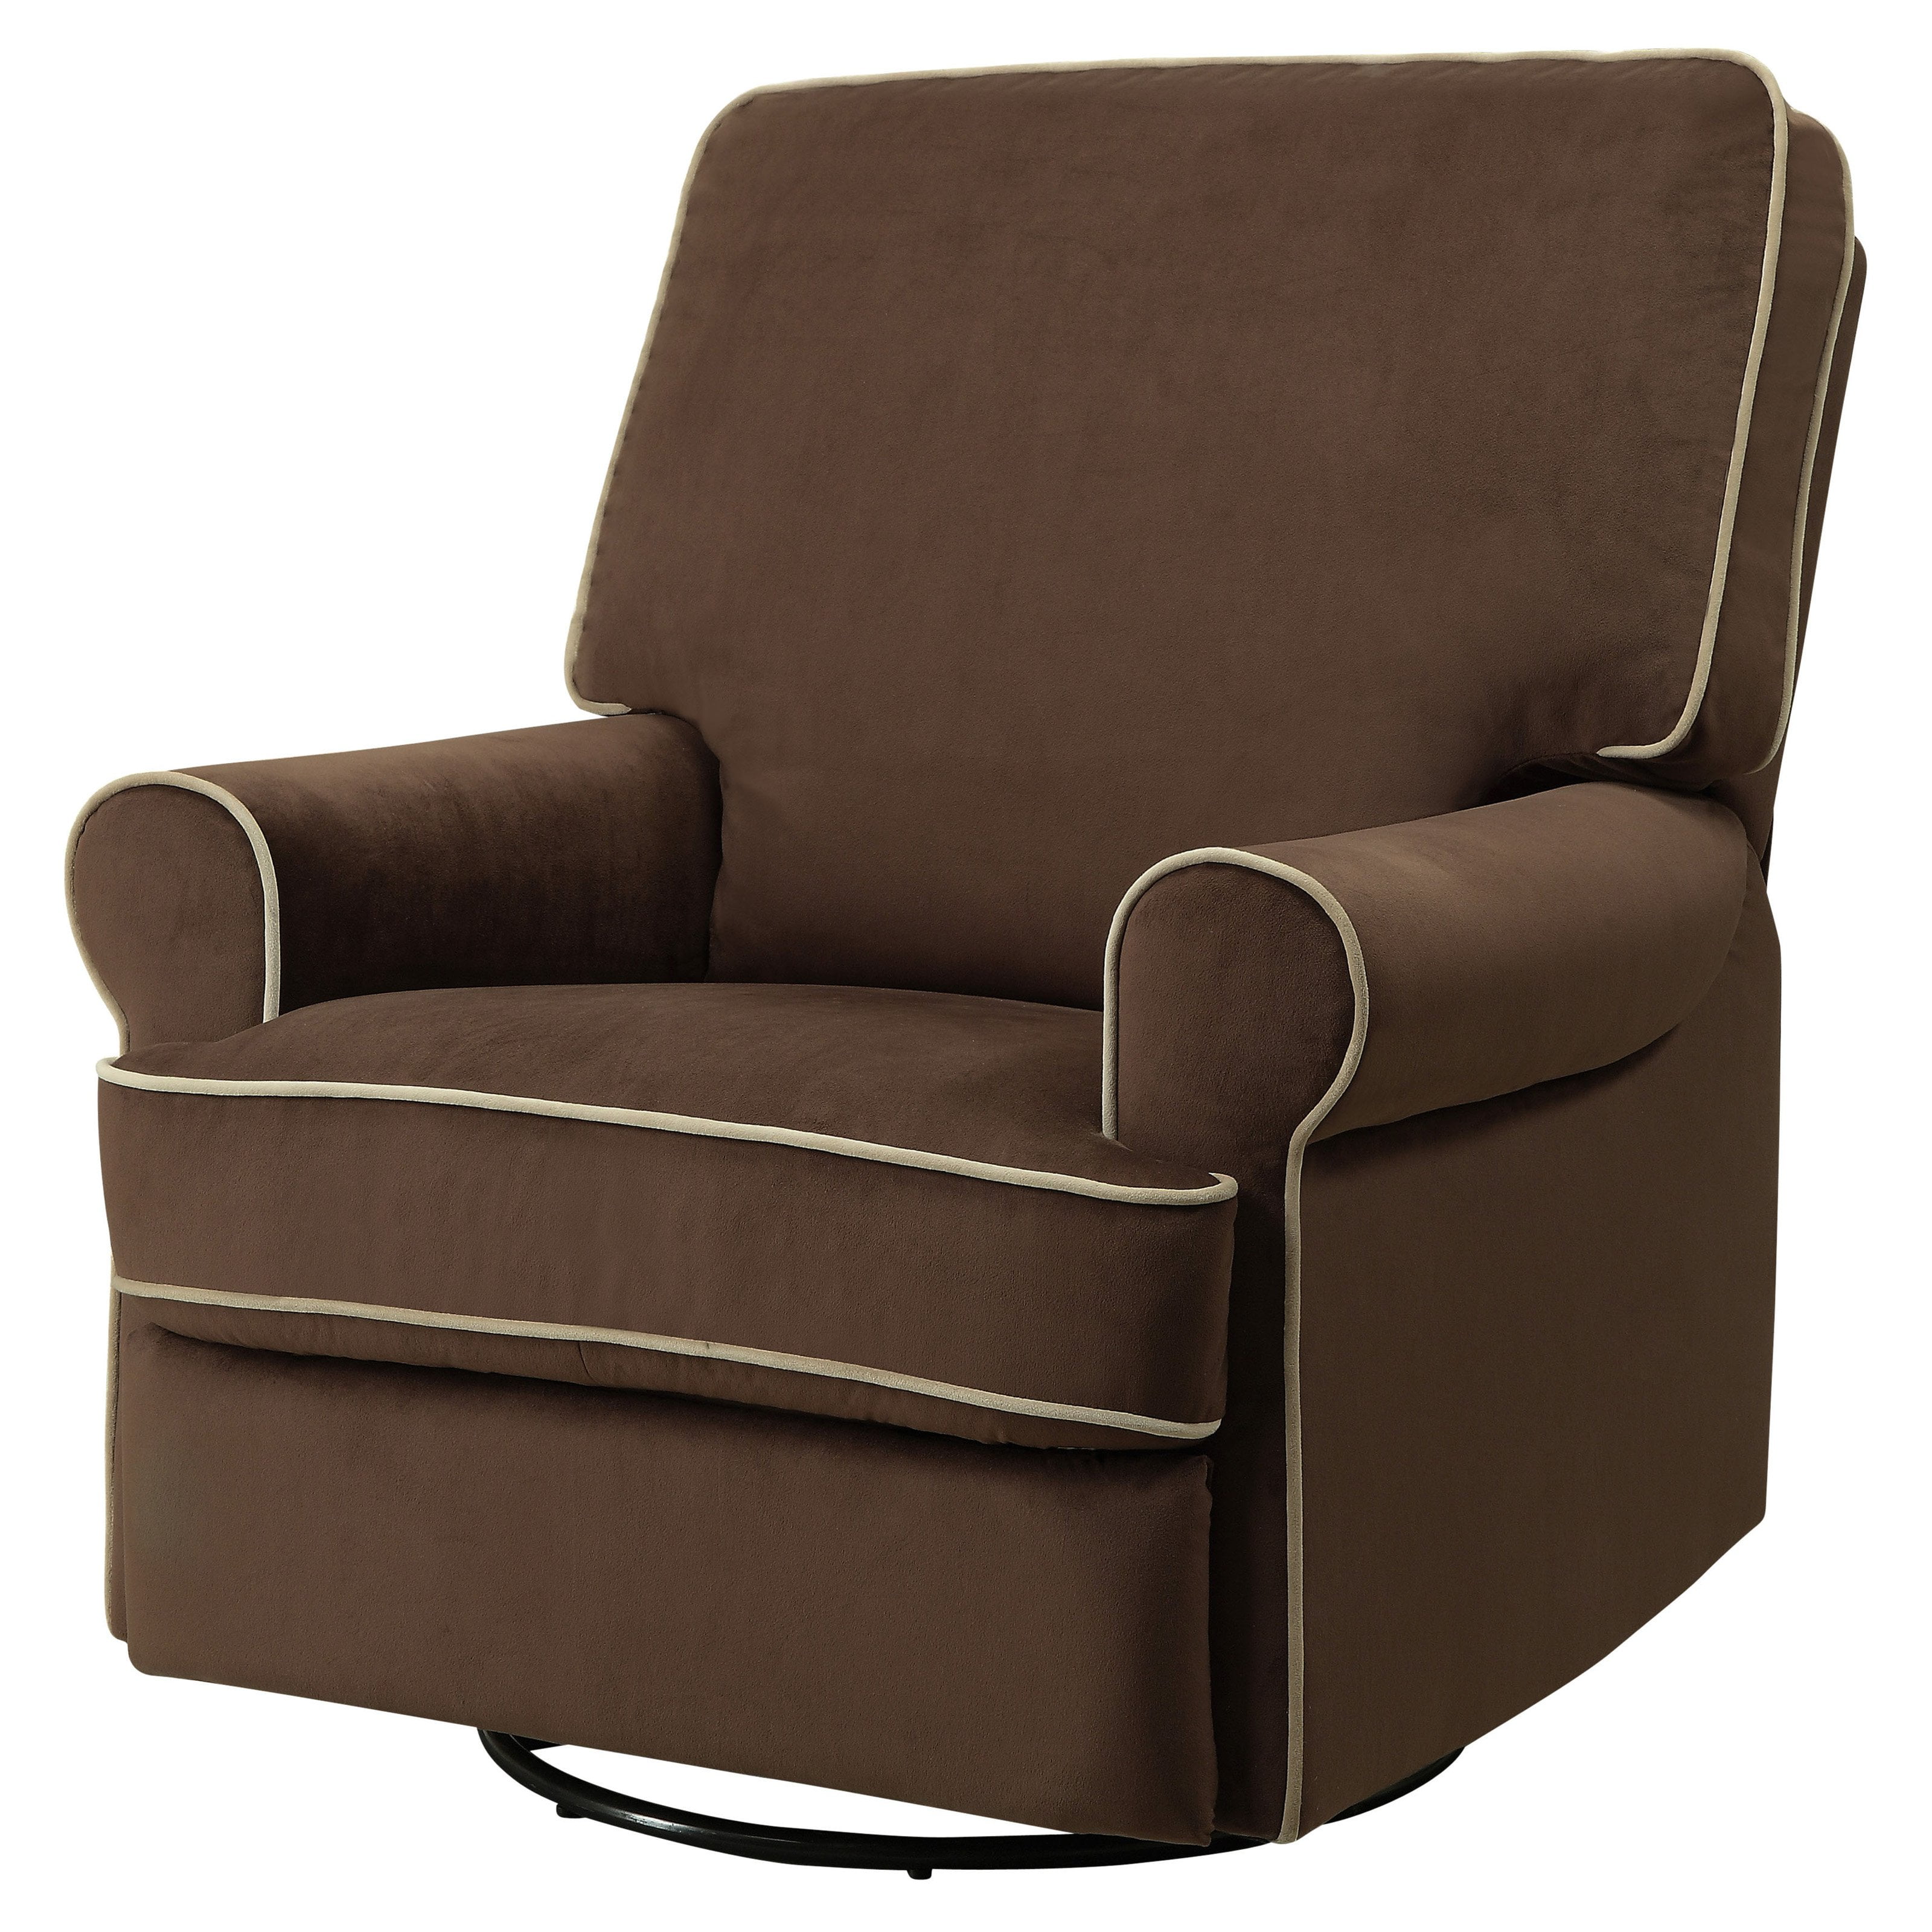 Prime Resources Birch Hill Swivel Glider Recliner Chair with Doe